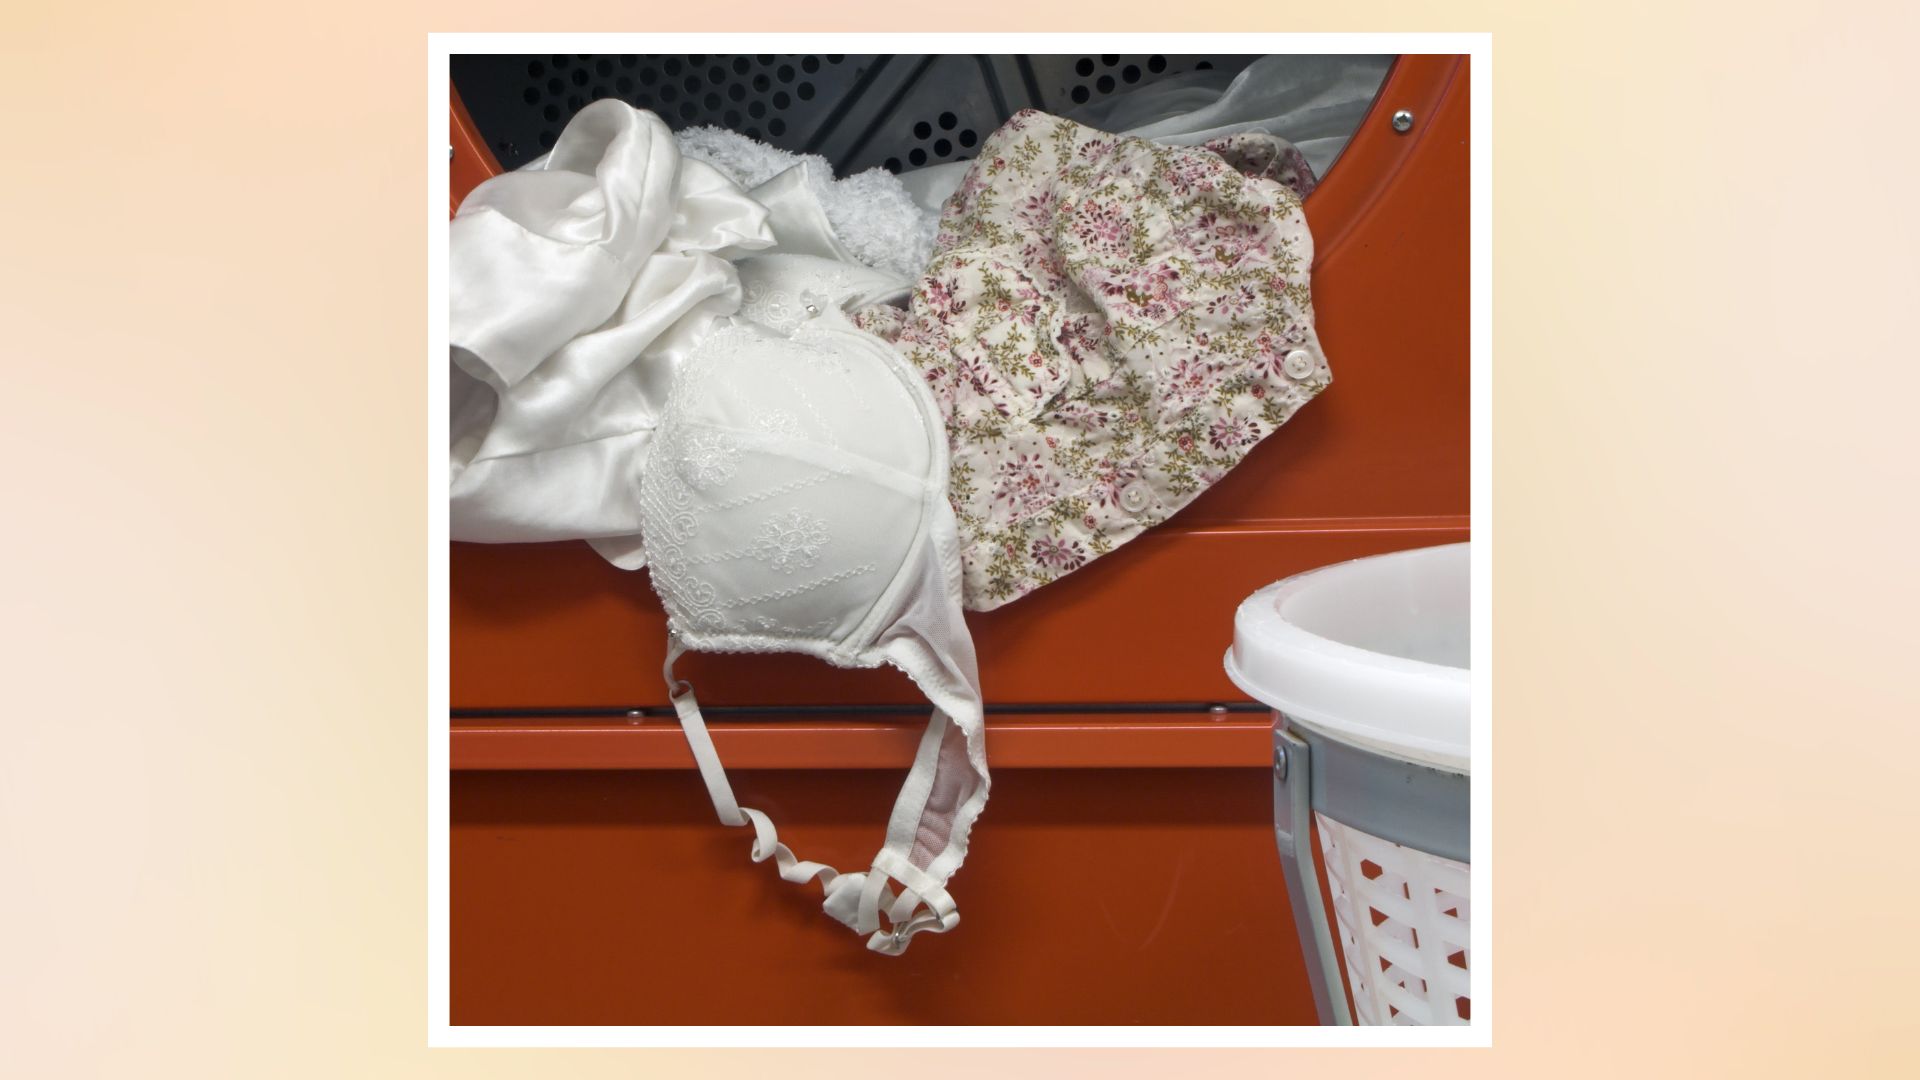 A laundry expert explains how to clean bras properly…